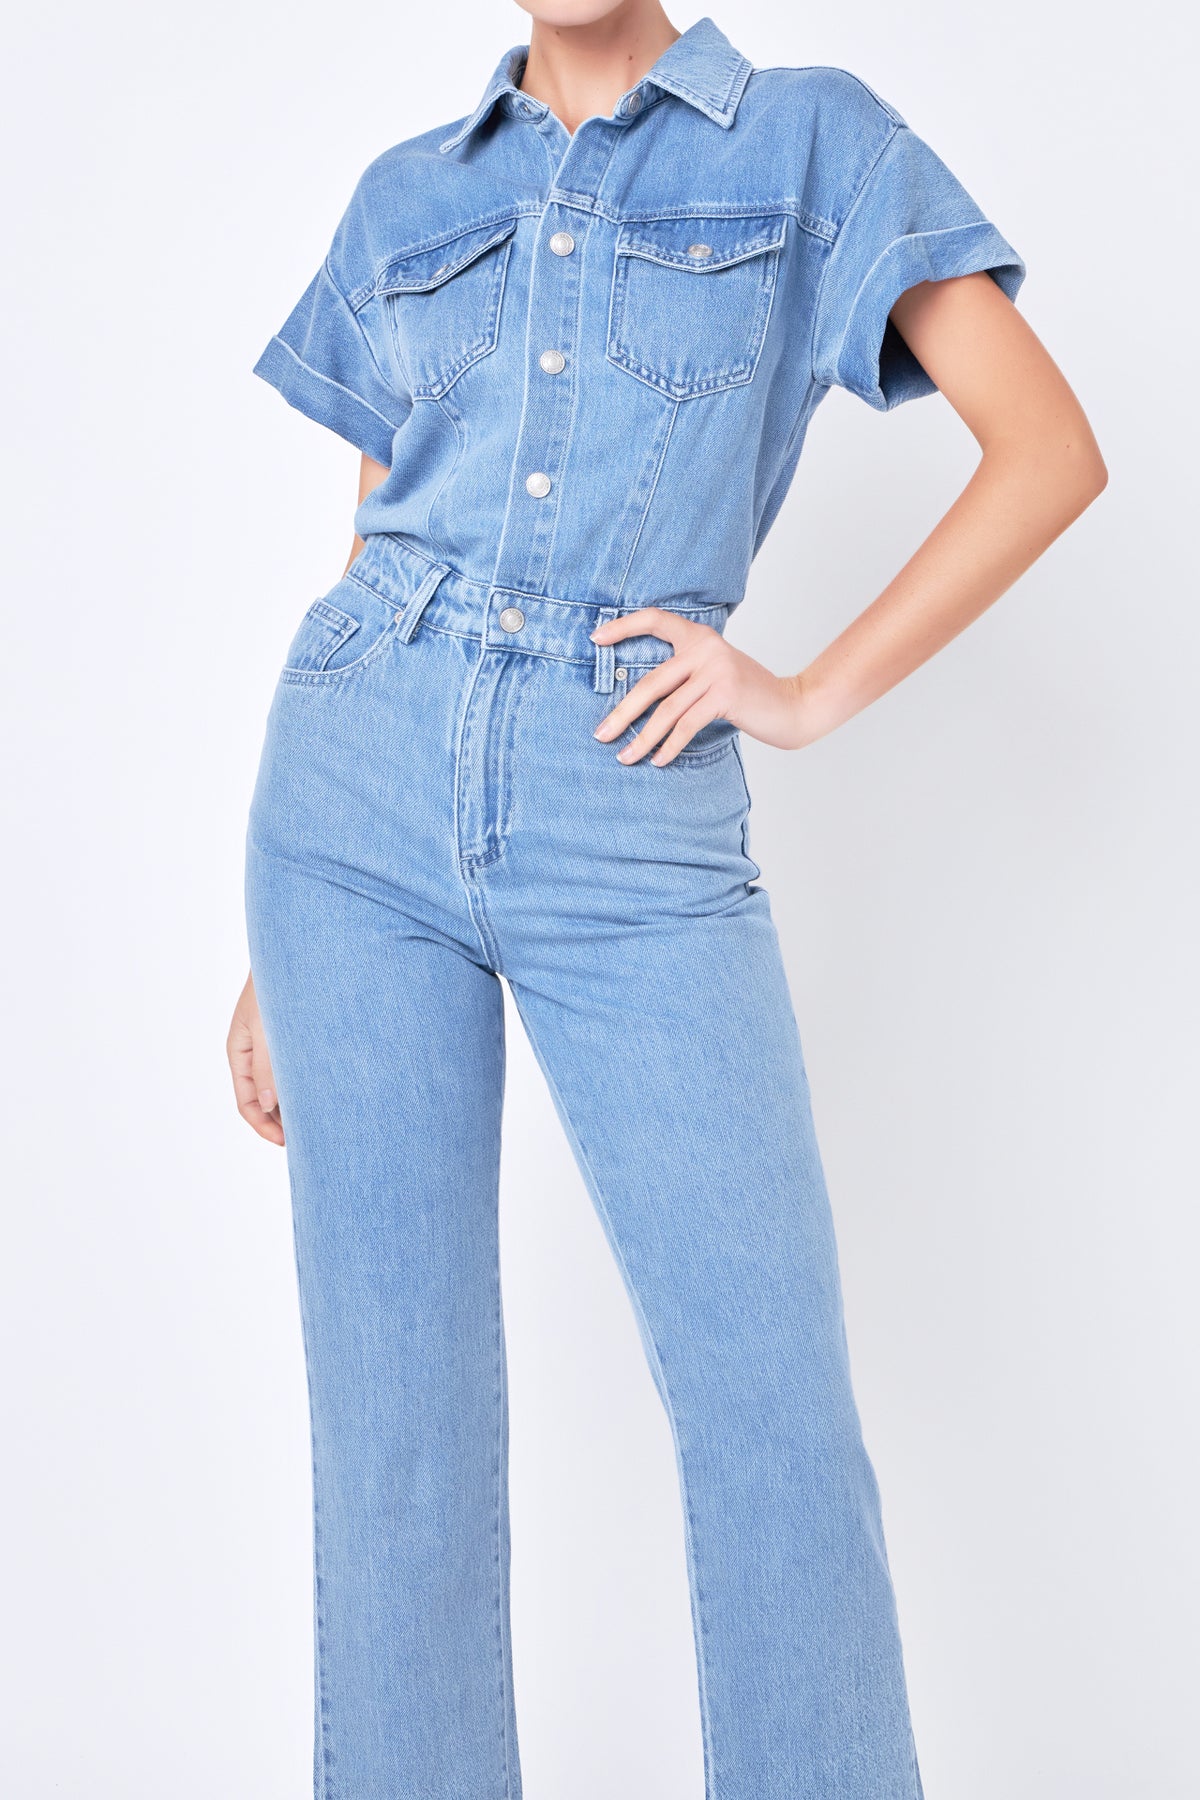 GREY LAB - Short Sleeve Denim Jumpsuit - JUMPSUITS available at Objectrare